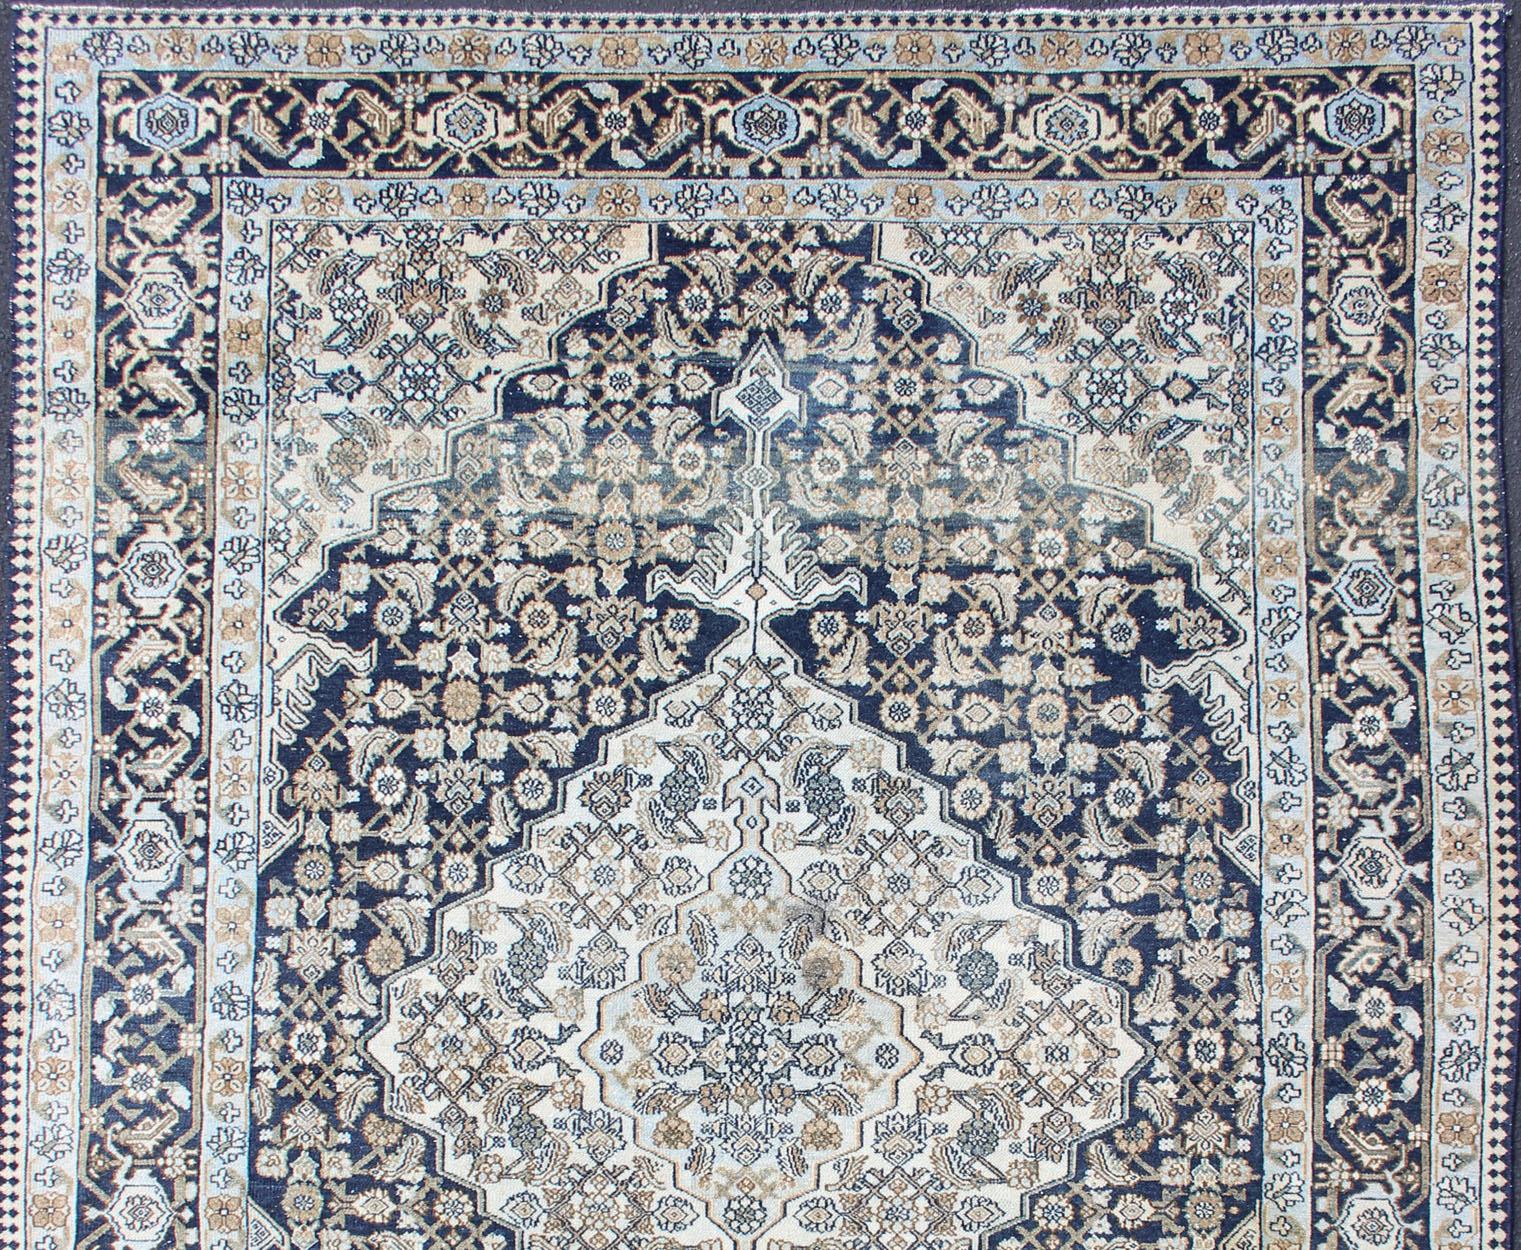 Persian antique carpet with center medallion and flower motifs, rug R20-0504, country of origin / type: Iran / Hamadan, circa 1920.

This antique Hamadan carpet from 1920s Persia features a traditional medallion design rendered in a variety of